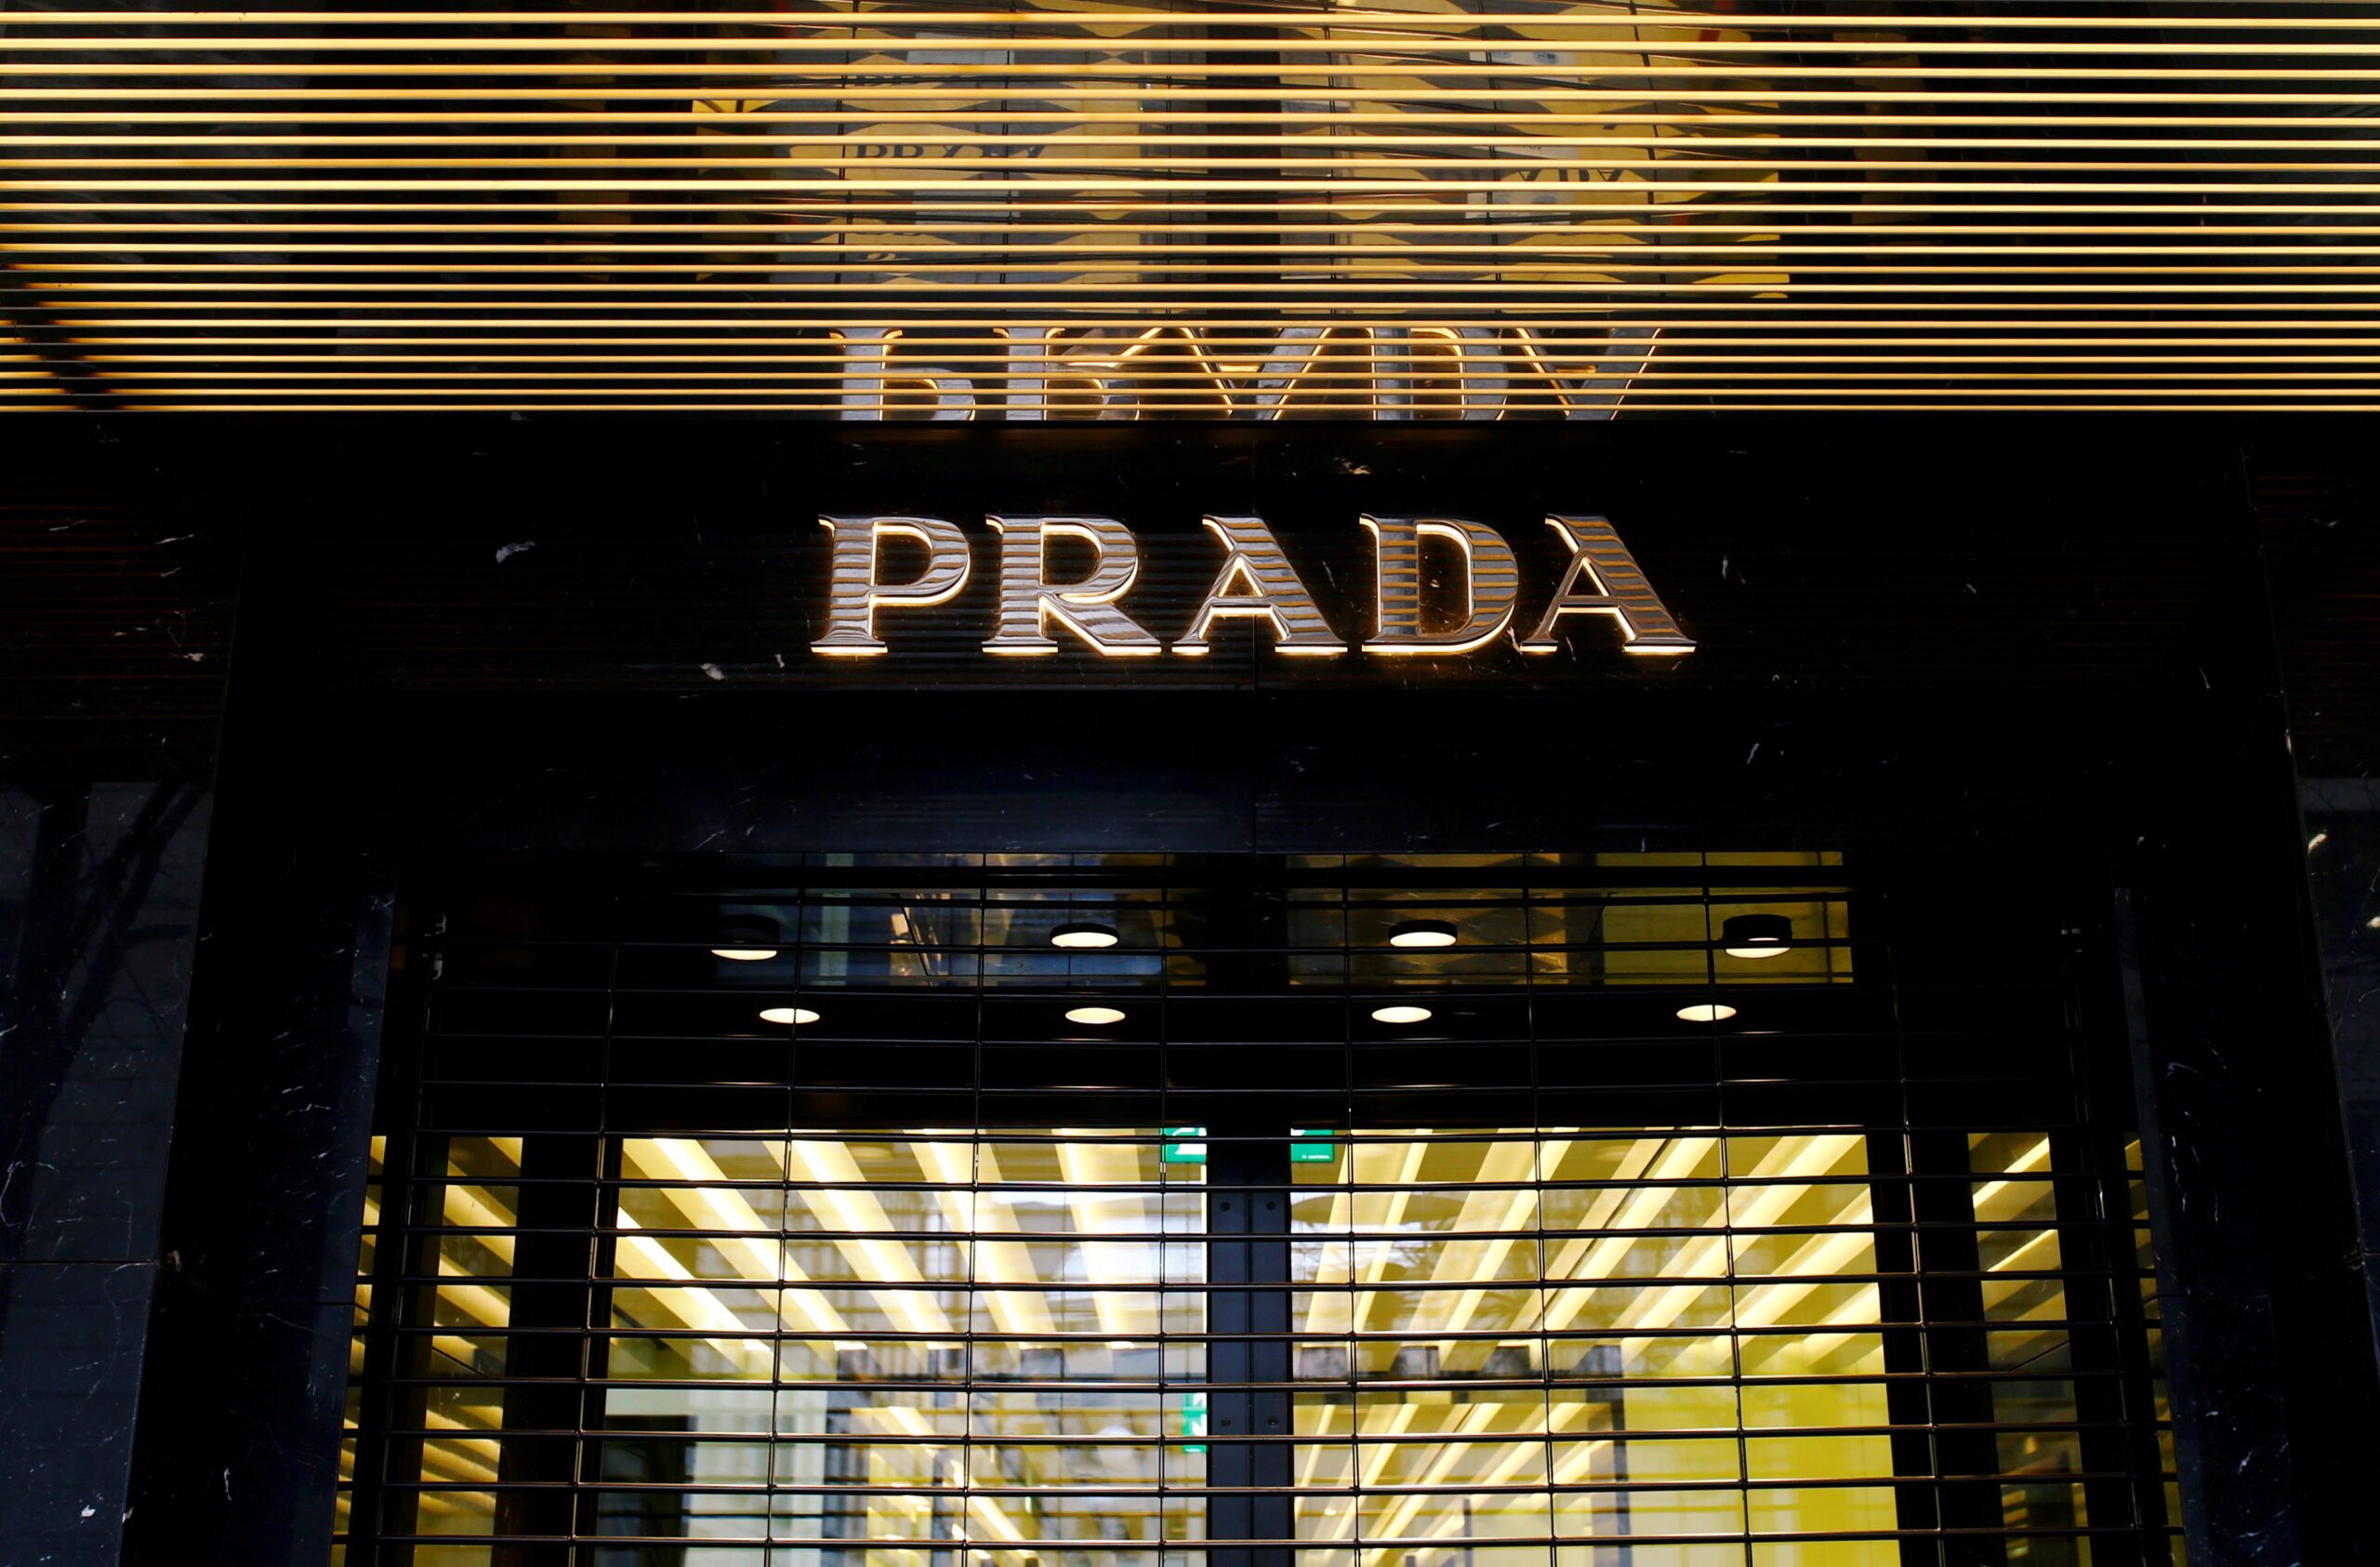 Prada sees second-hand fashion as opportunity, weighs partnerships